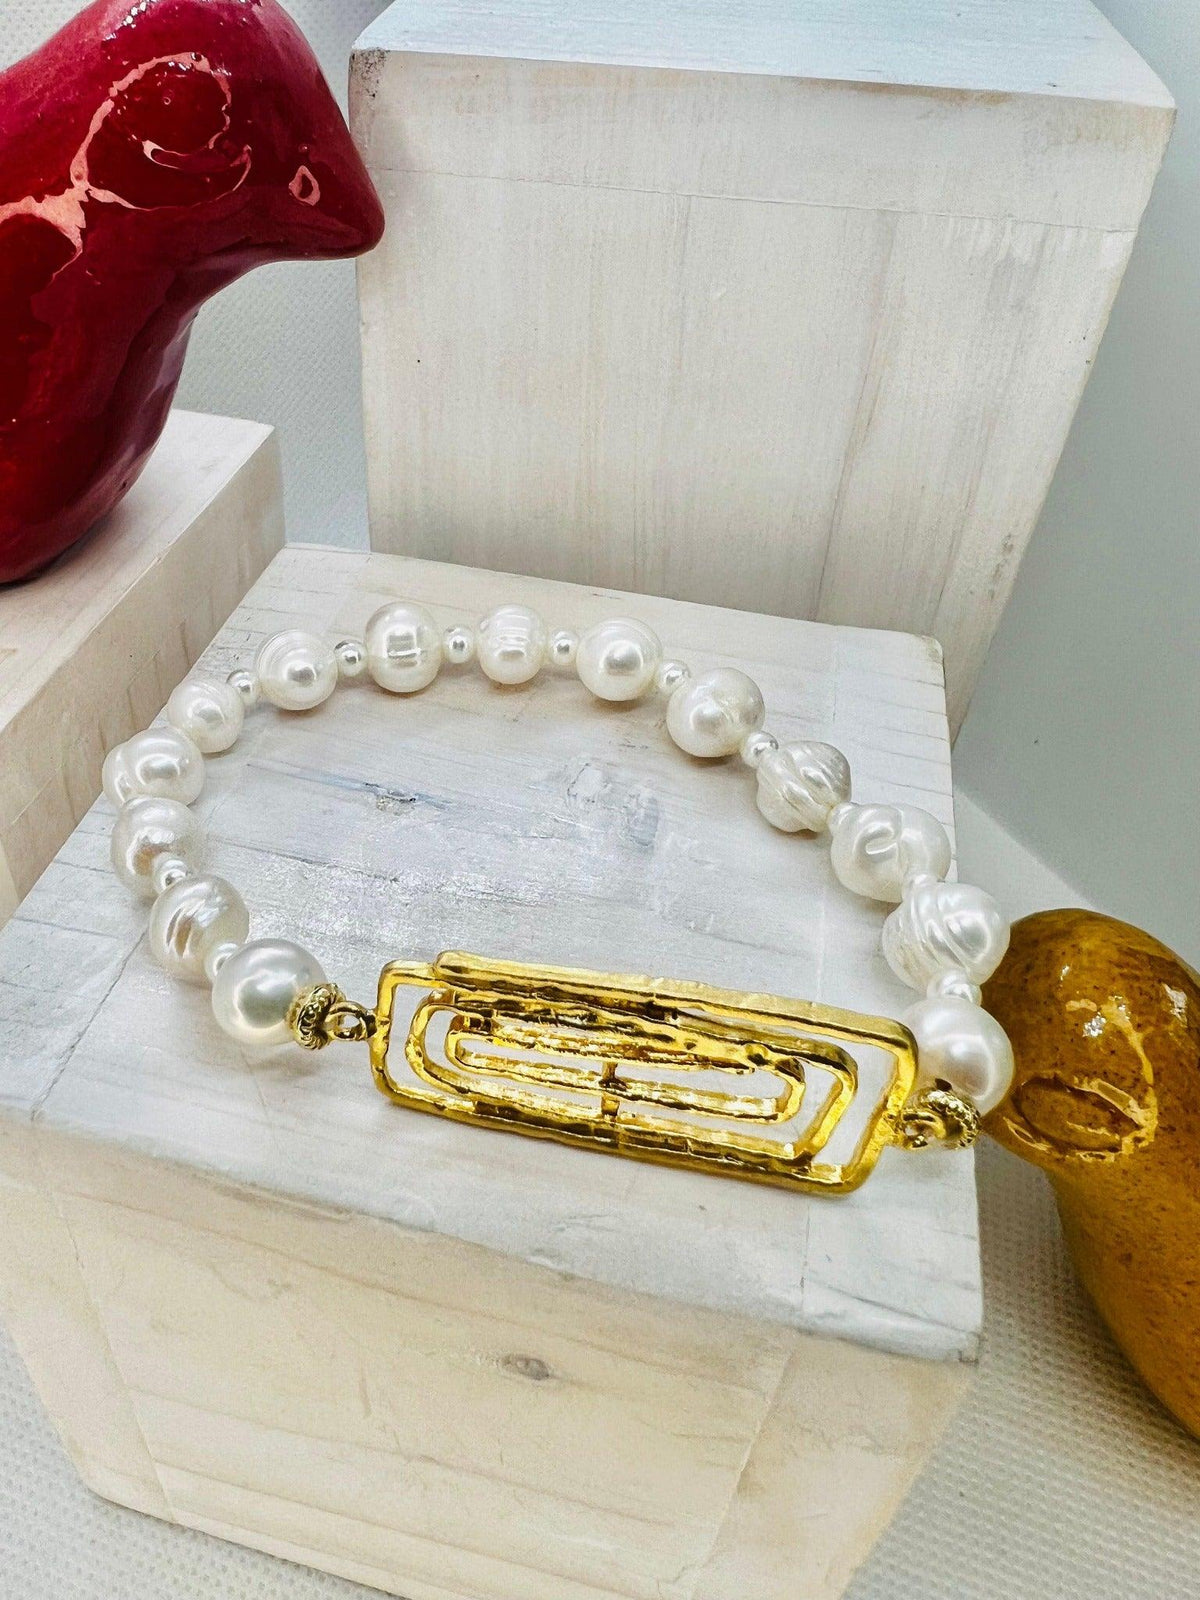 Anais Cultured Pearls Bracelet - Penelope Made This 